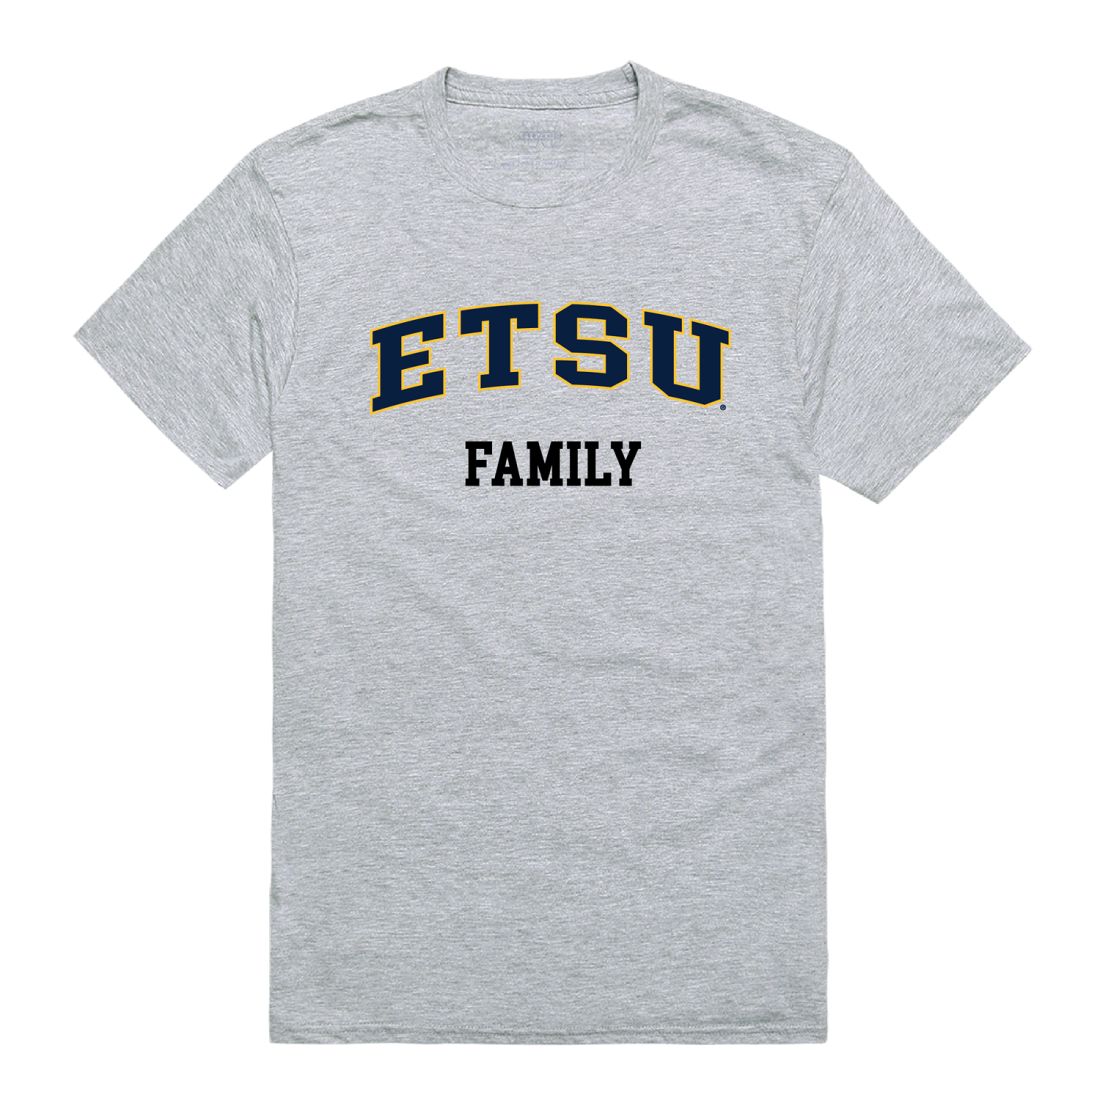 ETSU East Tennessee State University Buccaneers Family T-Shirt